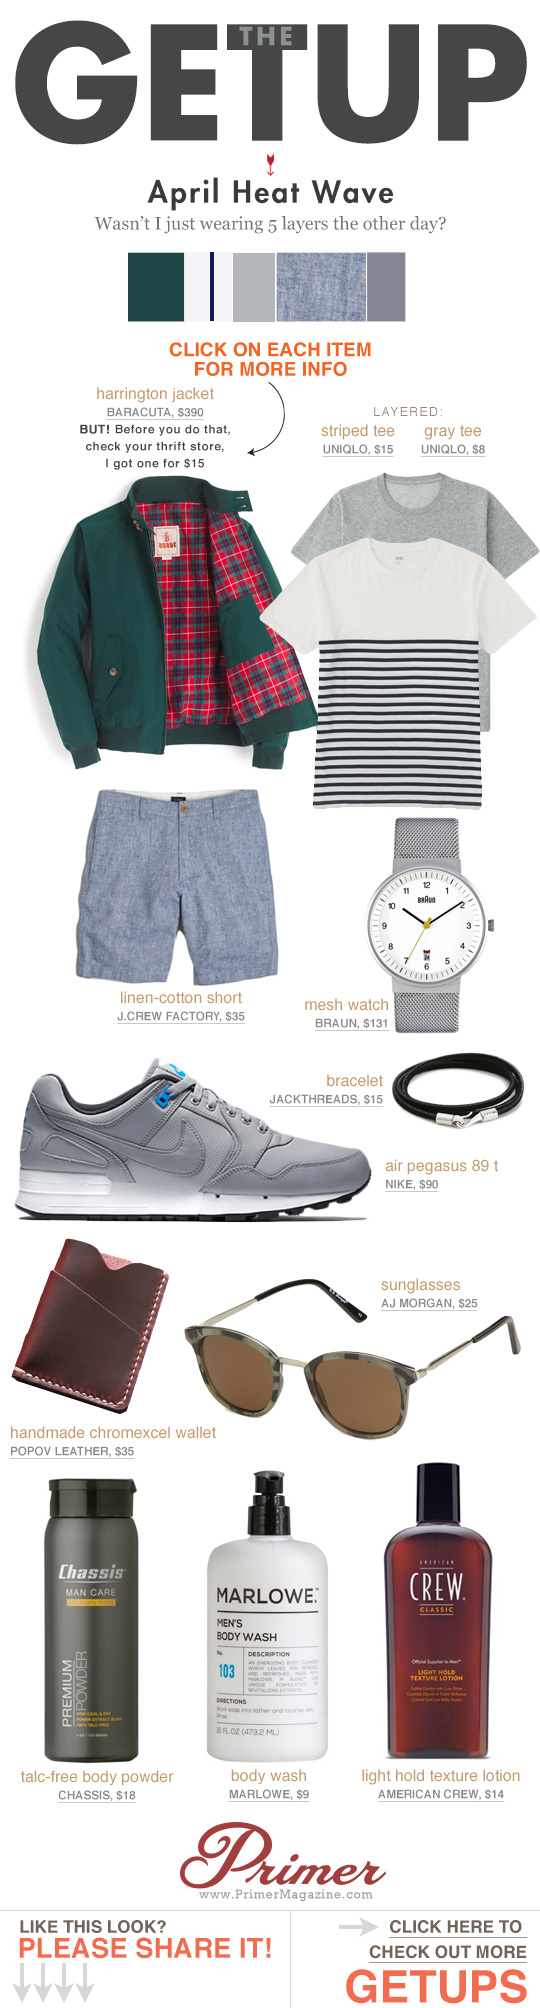 The Getup - April Heat Waves - summer outfit inspiration featuring green jacket, striped shirt, and sneakers